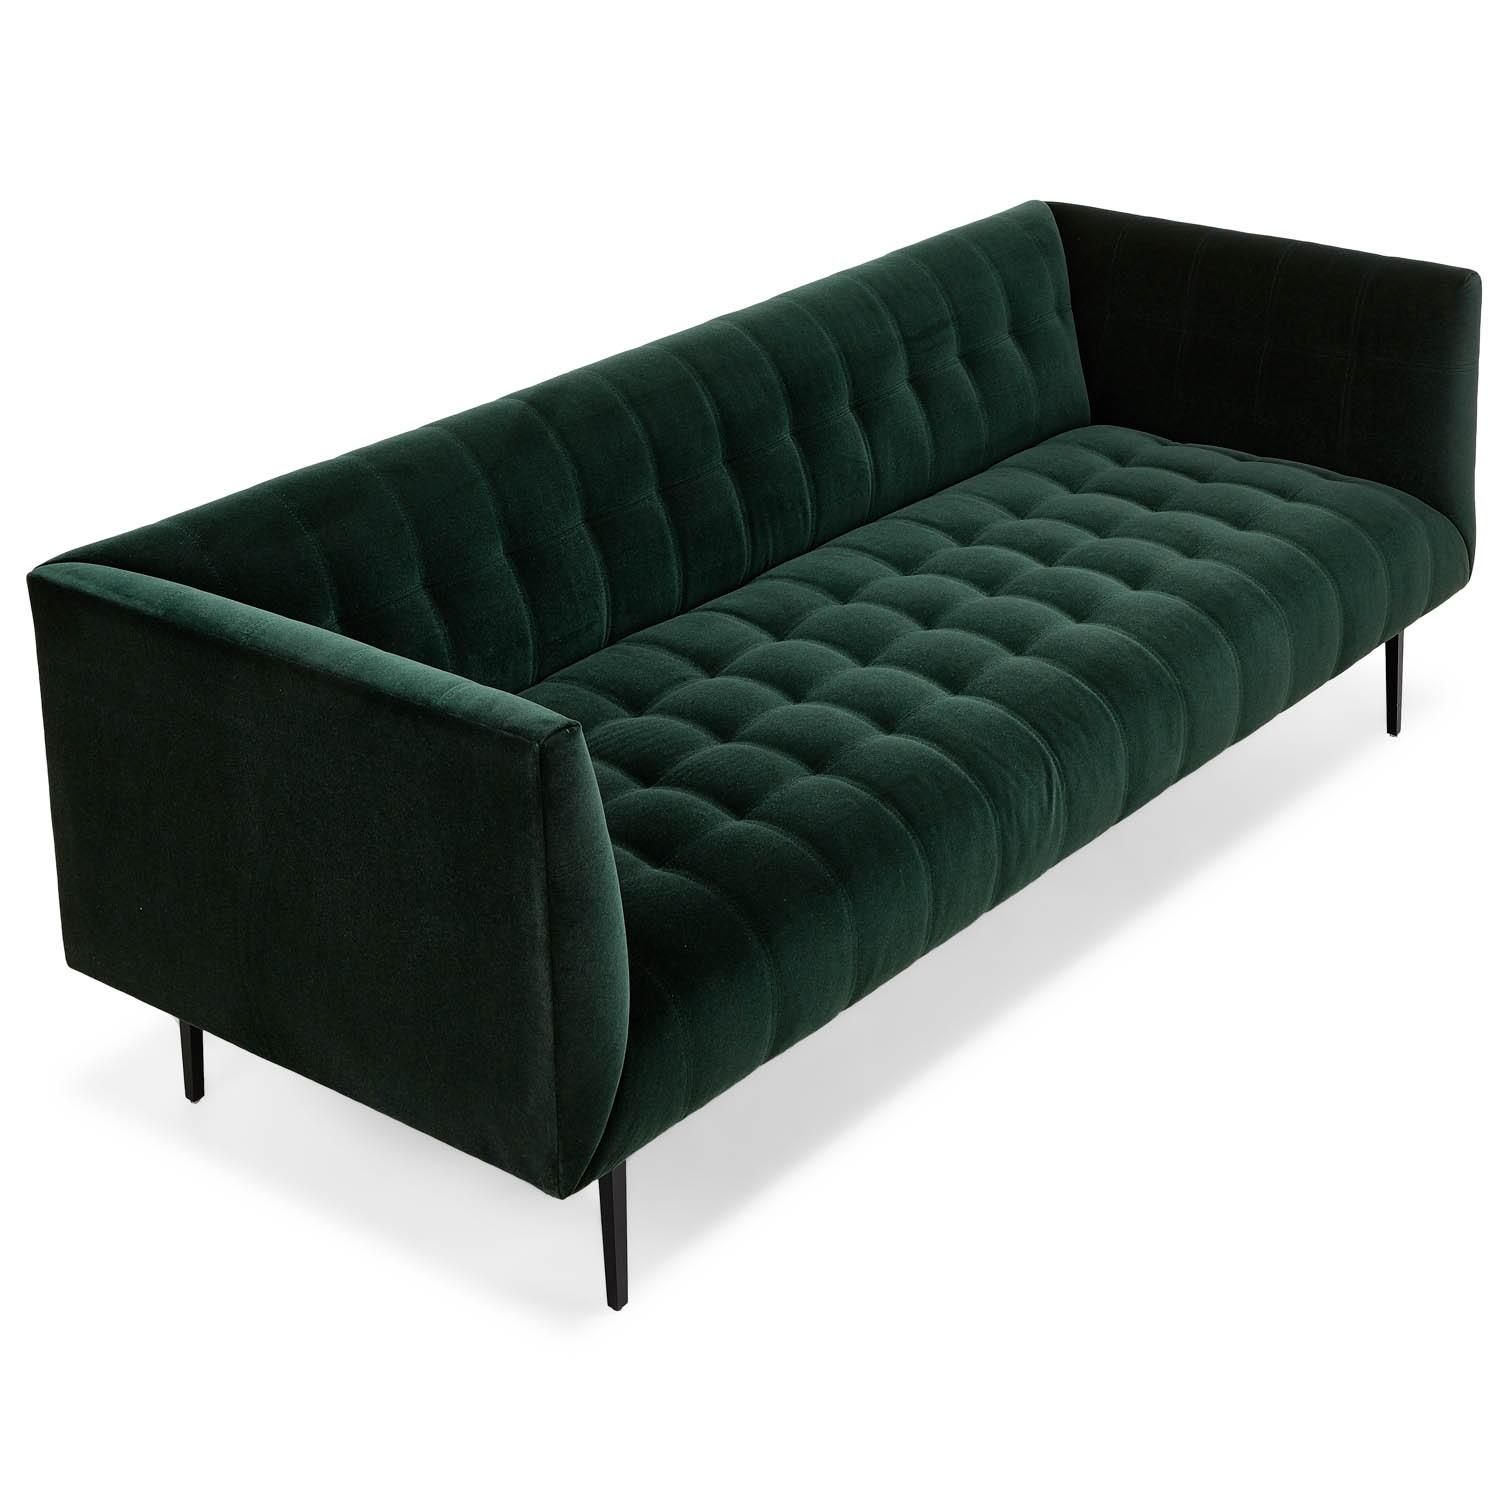 Hill Adams Sofa Throughout Cobble Hill Sofas (View 15 of 20)